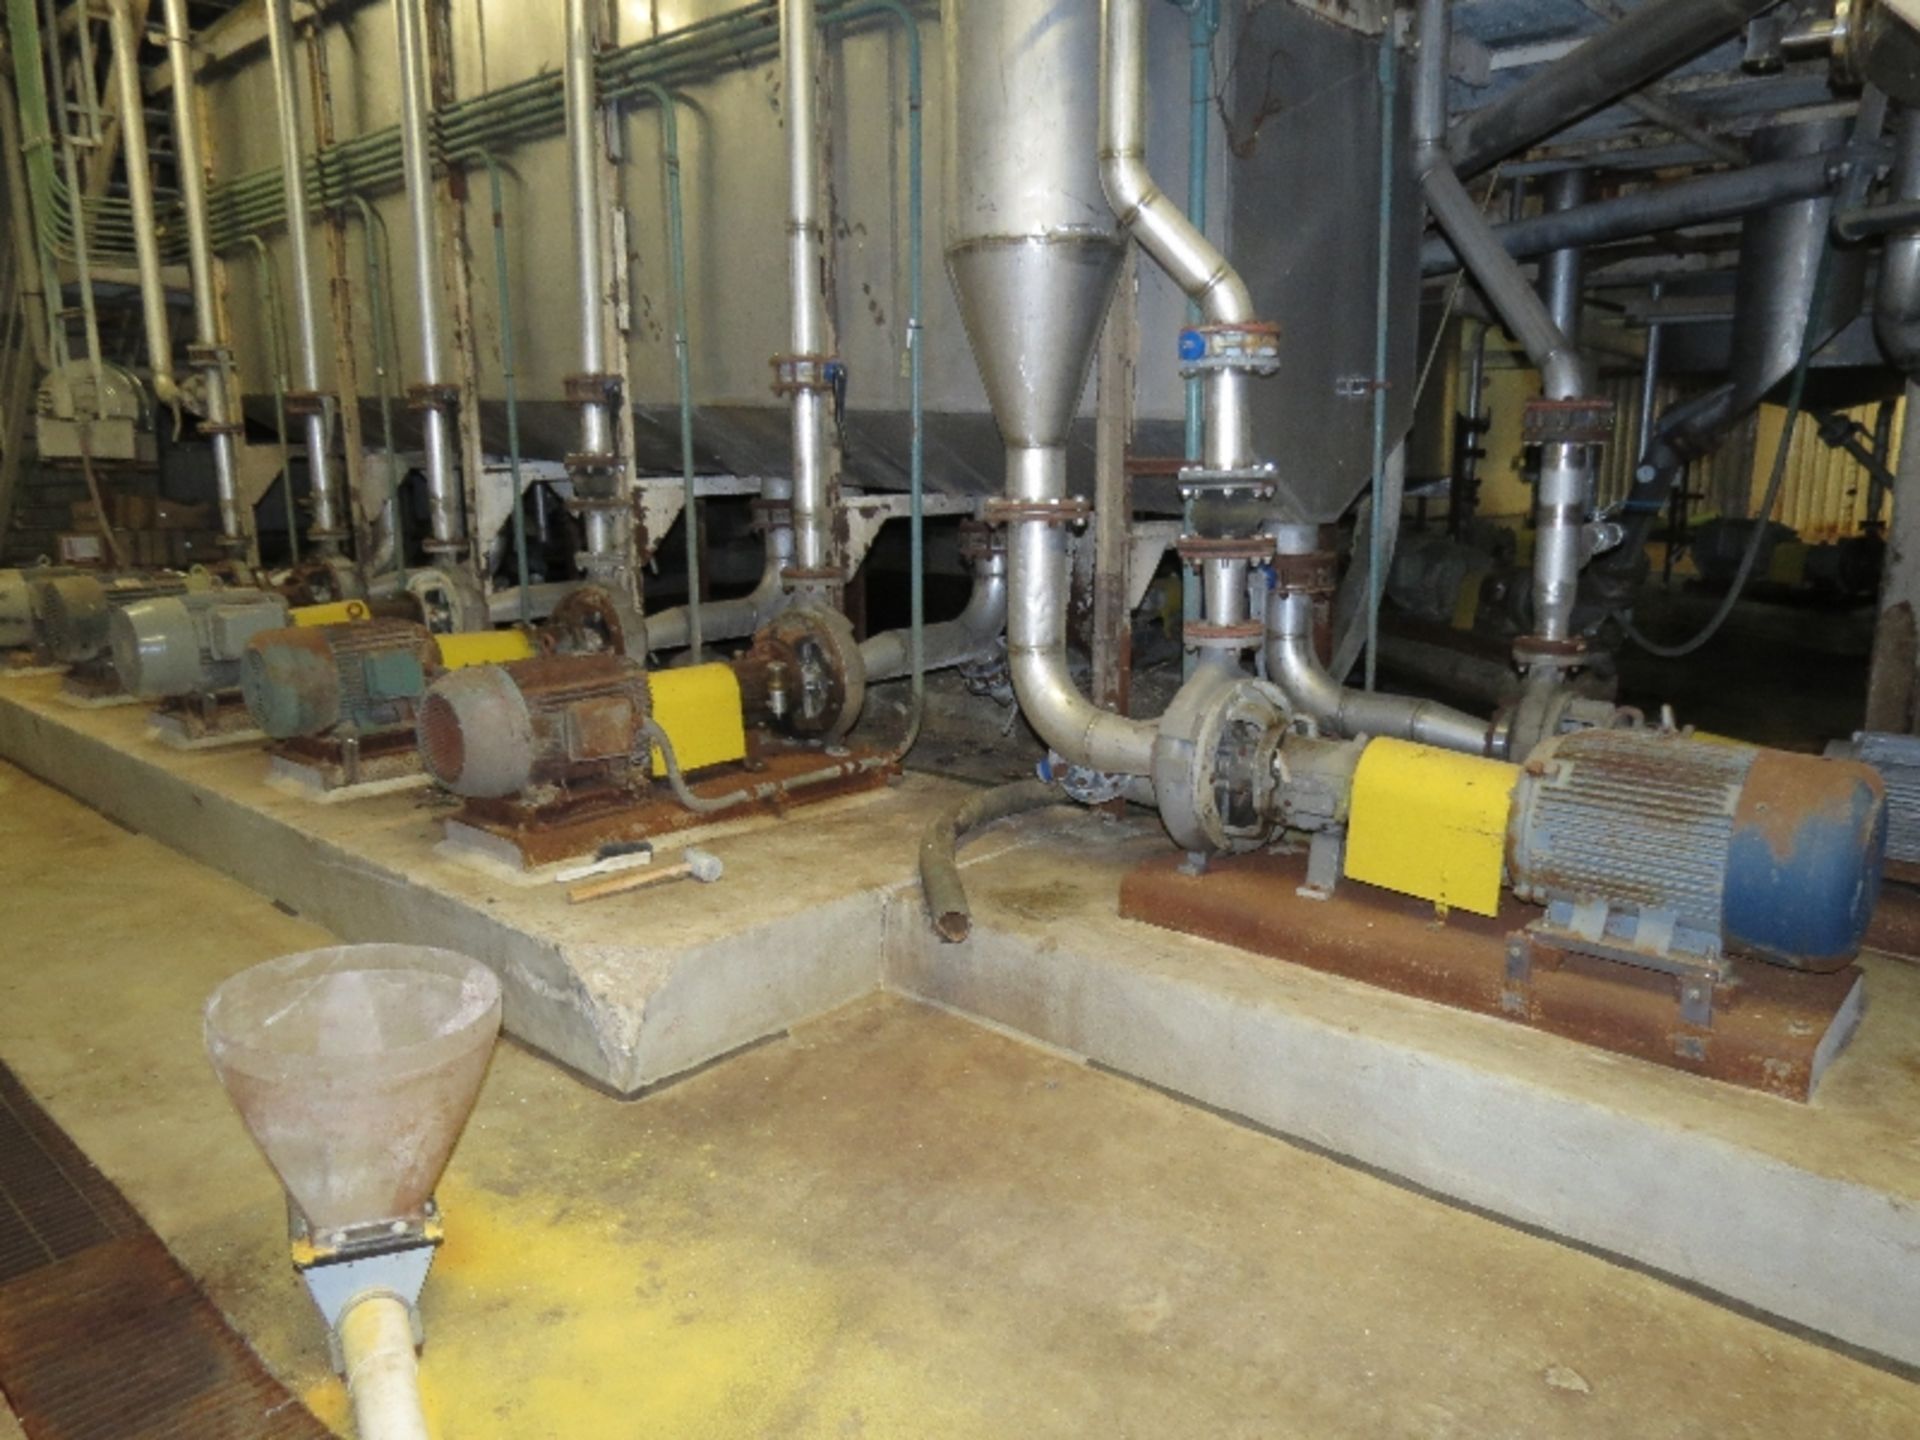 Fiber Washer system Stainless Steel Construction Trough with 7 Re-Circulation Pumps - Image 4 of 10